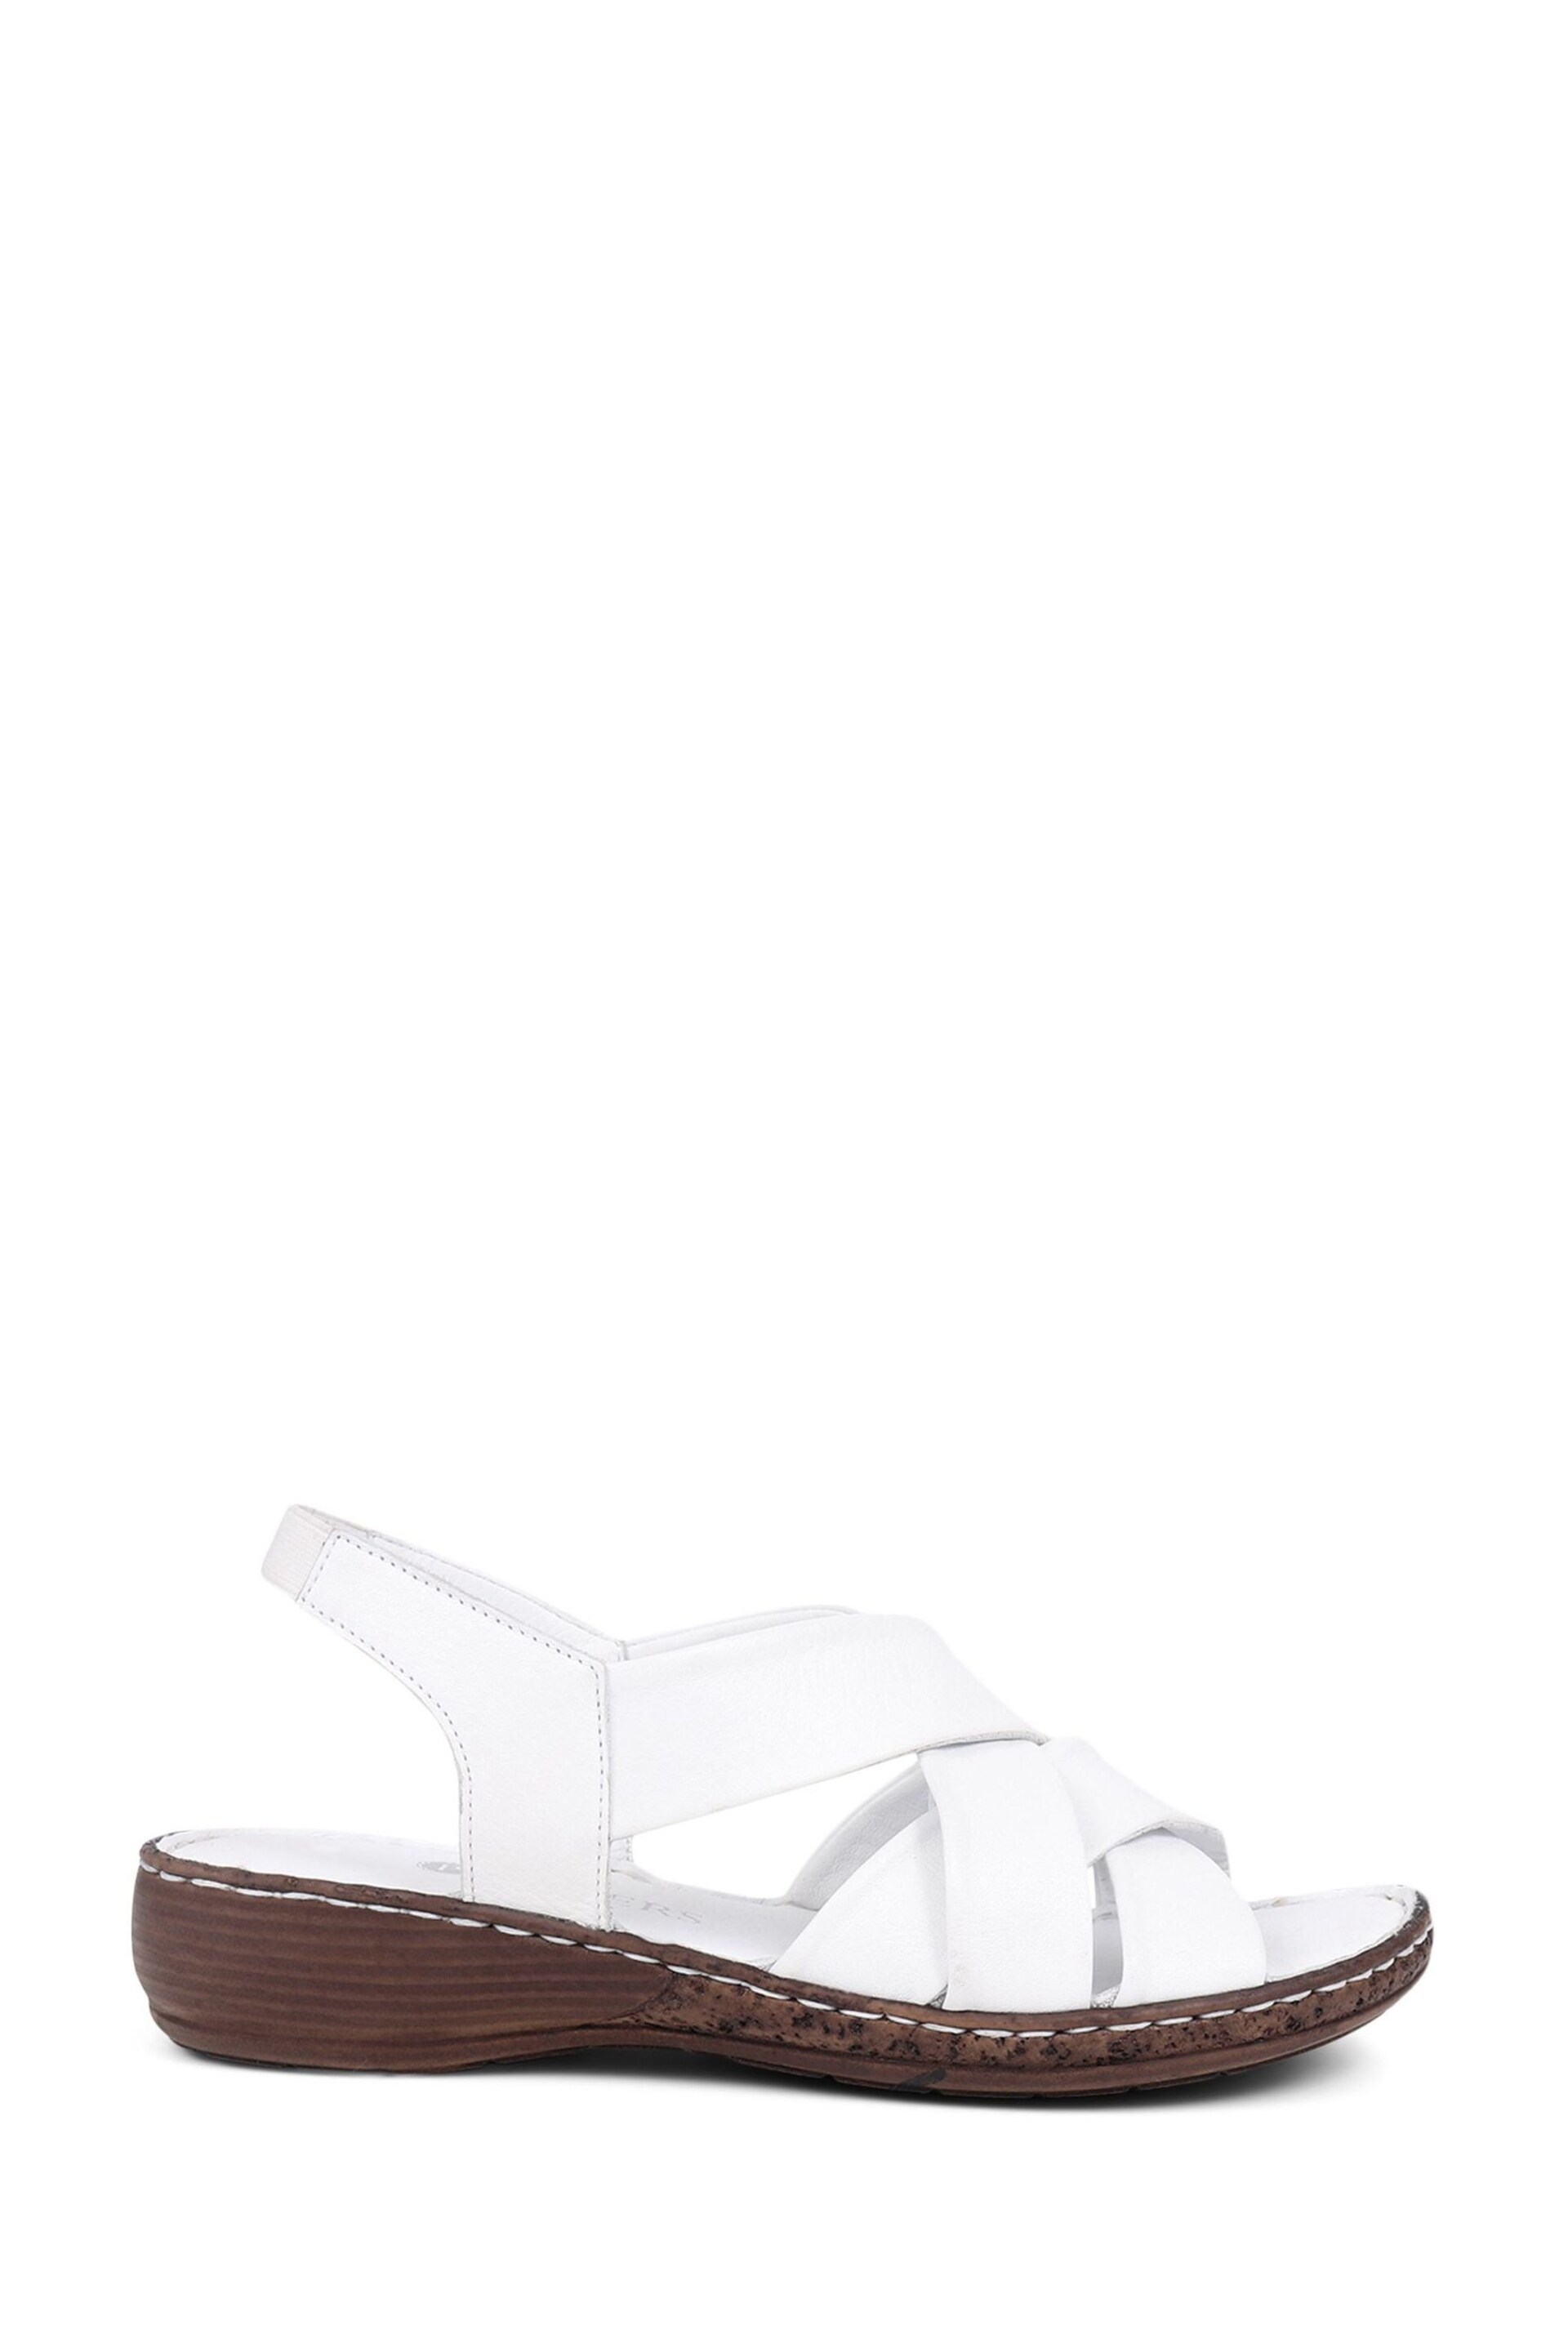 Pavers Leather Cross Strap Sandals - Image 1 of 5